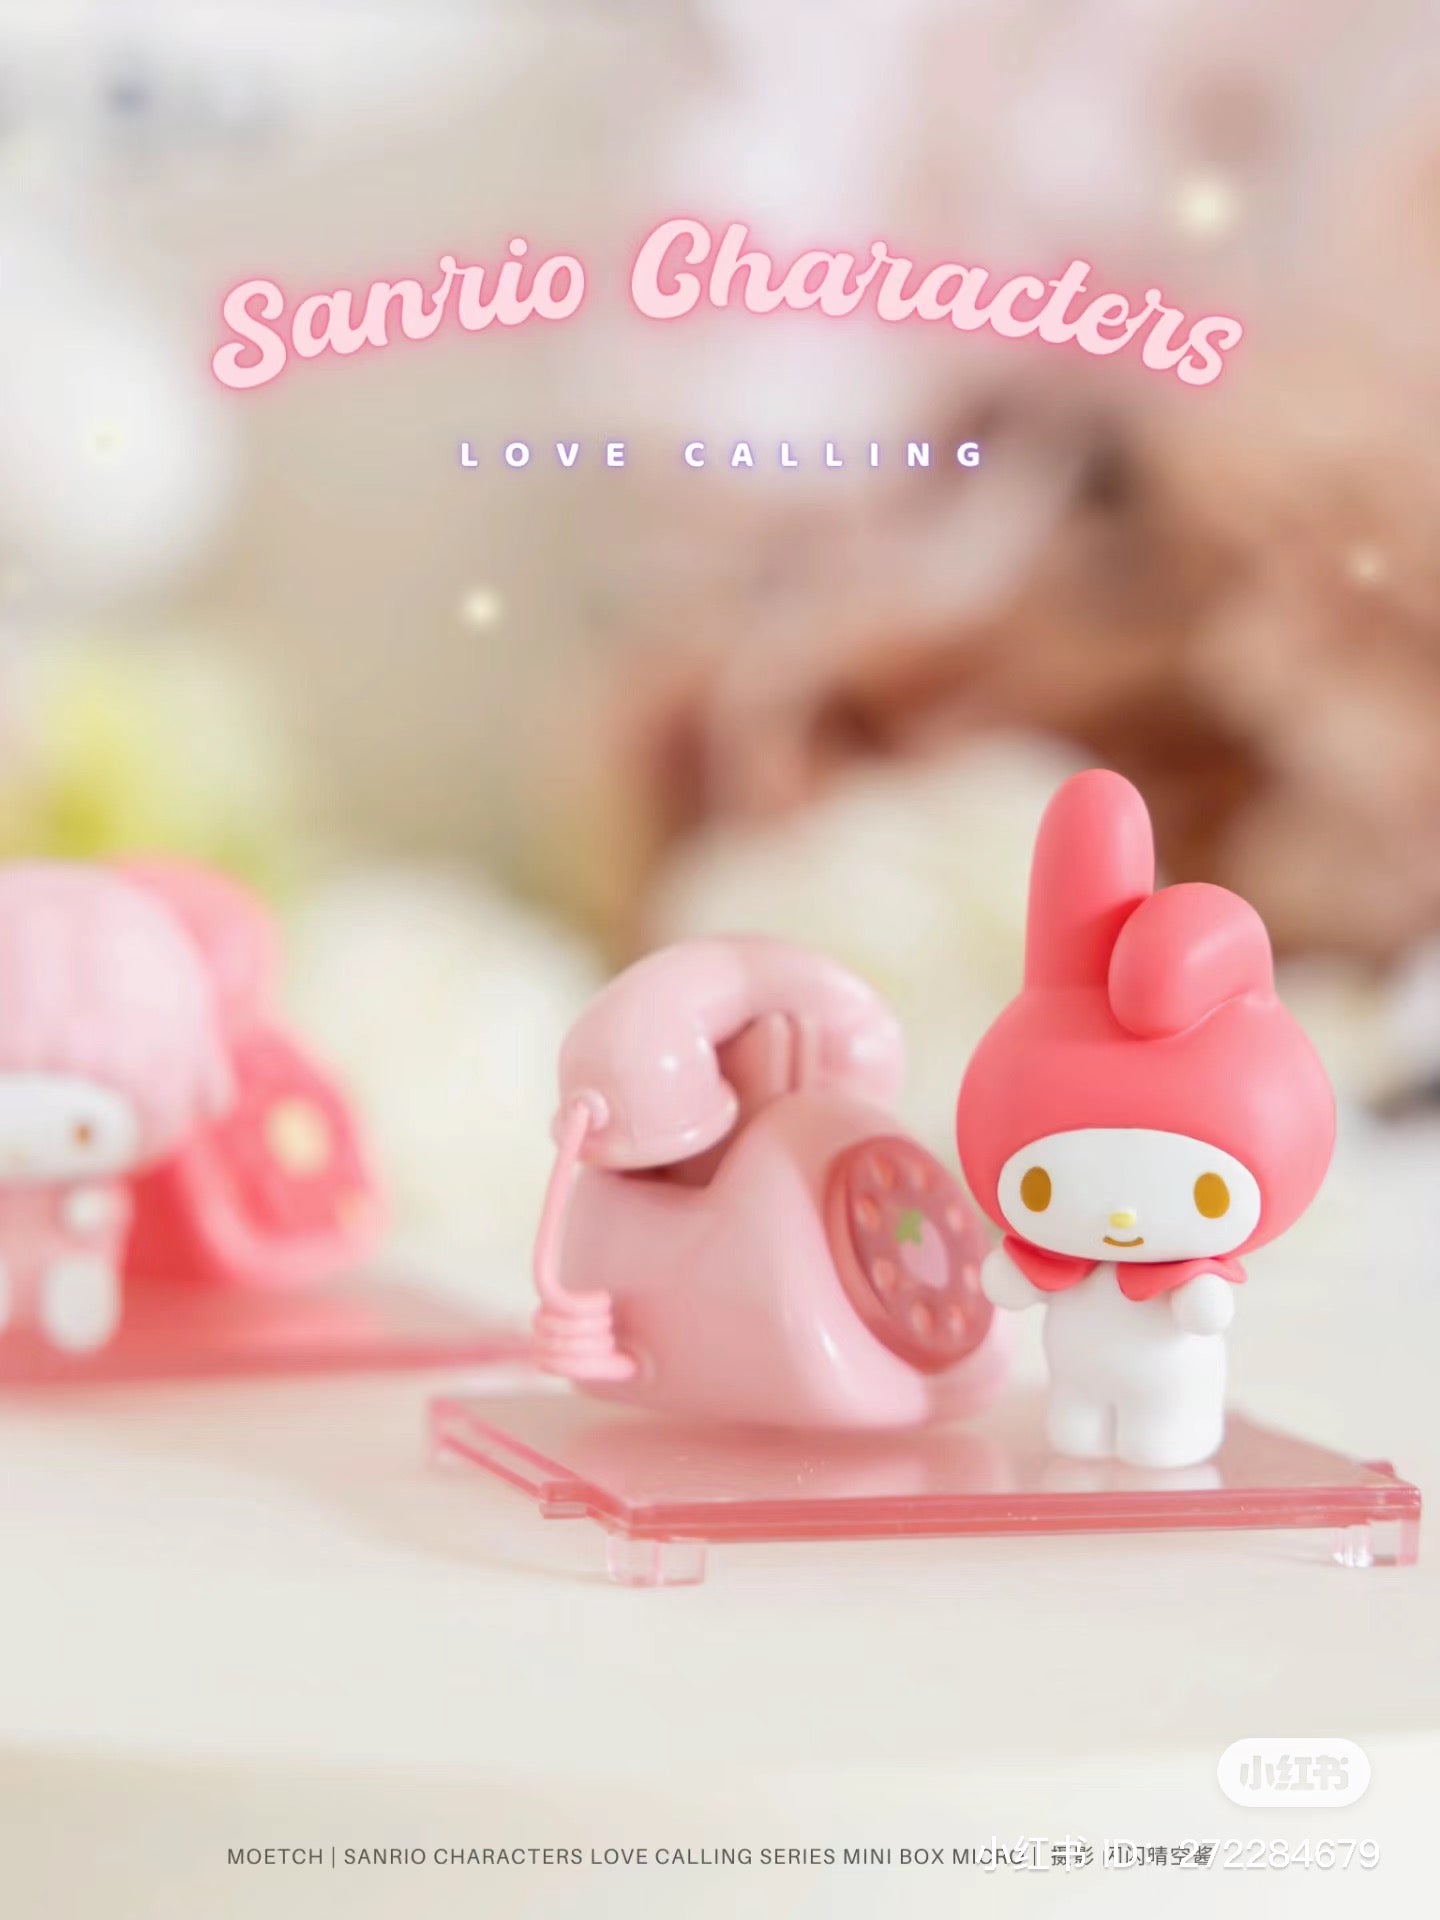 Alt text: Sanrio characters Love Calling Series Mini Box Micro Blind Box Series featuring various pink toy figures, including a rabbit and a telephone.